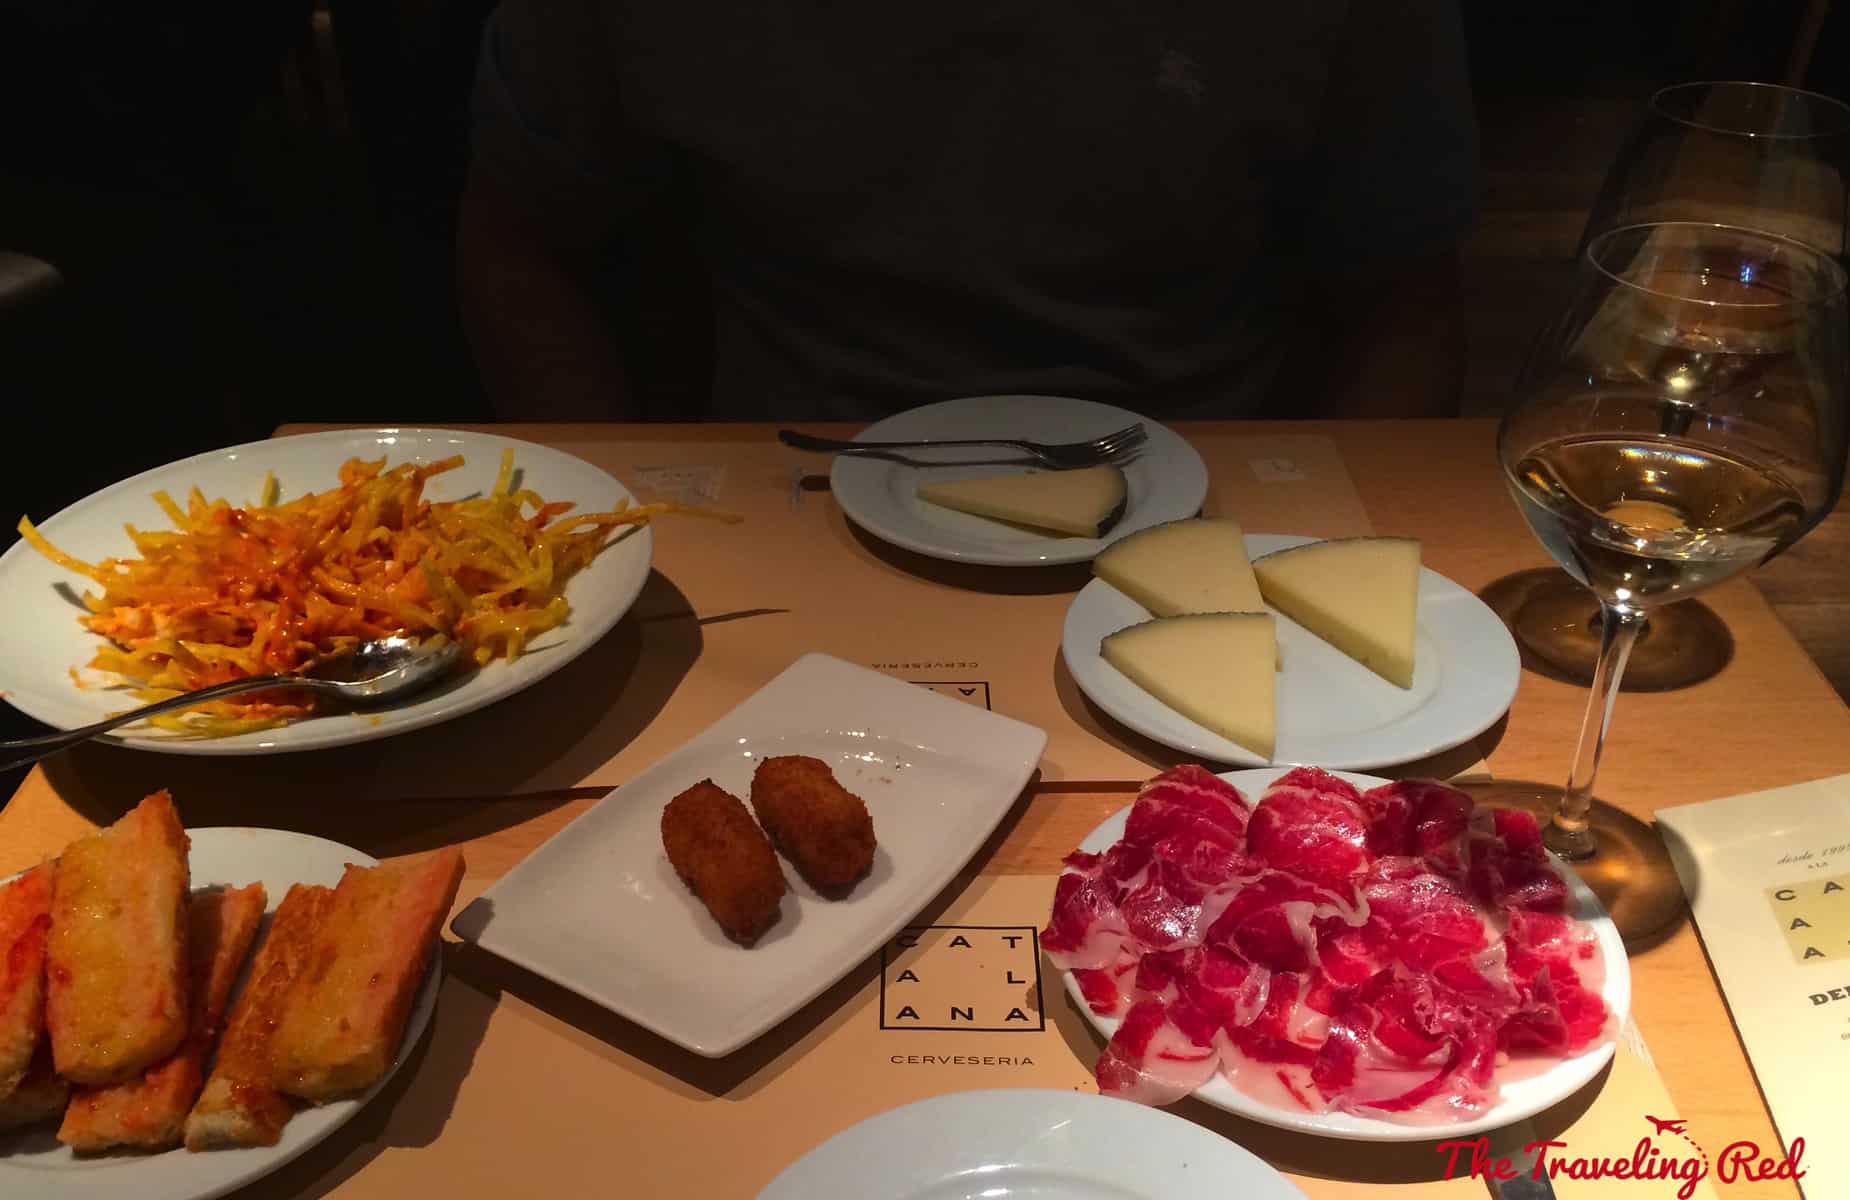 My go to tapas restaurant in Barcelona, Spain is always Cerveceria Catalana! It’s an inexpensive tapa place that is always packed and now I know why. I always recommend it and everyone loves it. You don't want to miss it!